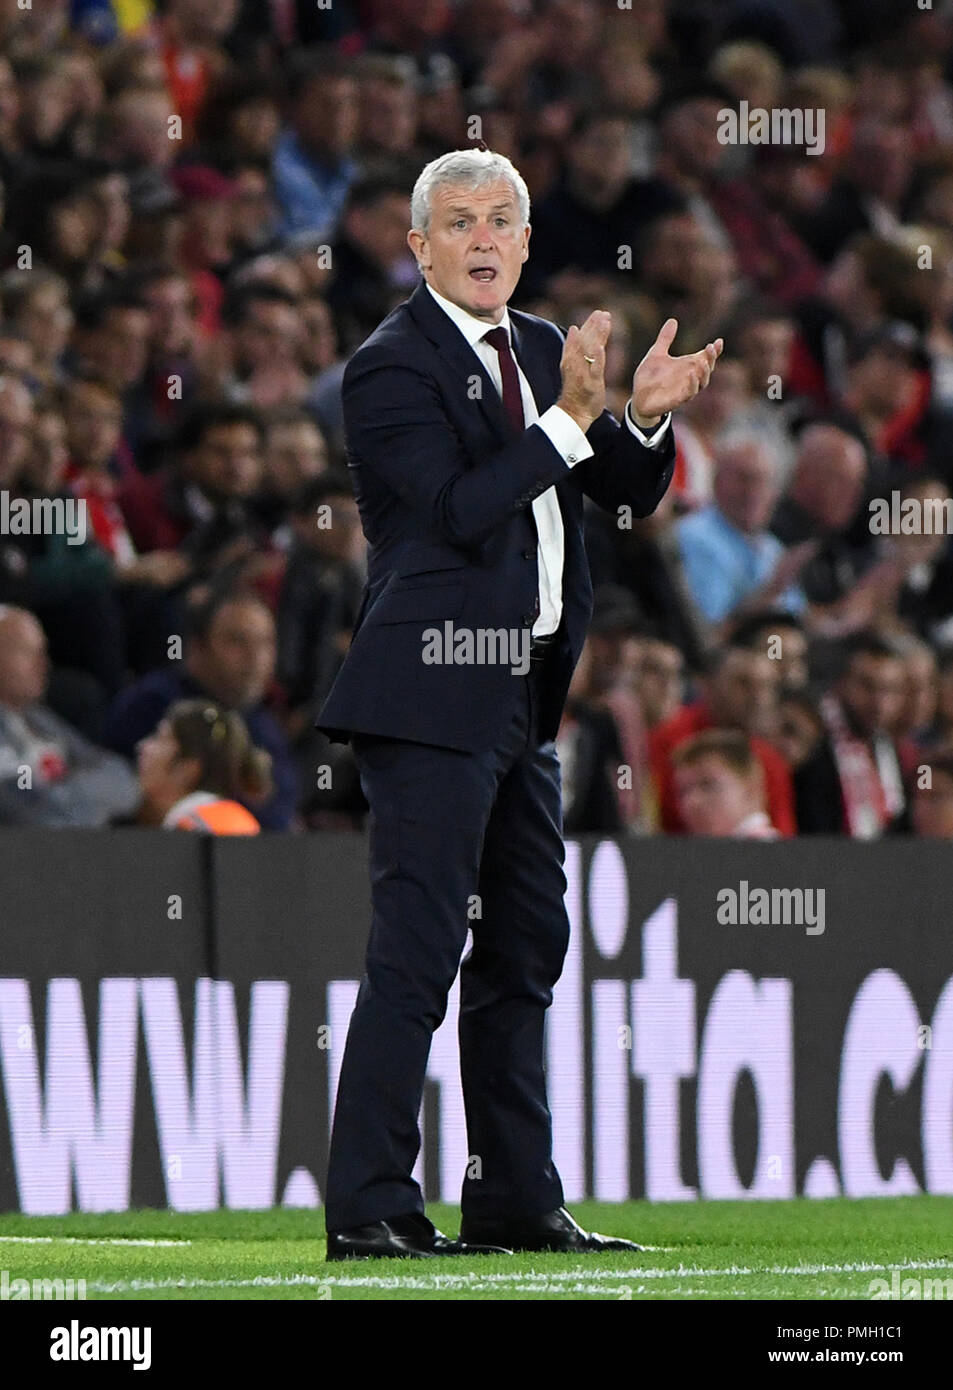 Mark Hughes, Southampton Manager - Southampton v Brighton & Hove Albion, Premier League, St Mary's Stadium, Southampton - 17th September 2018  STRICTLY EDITORIAL USE ONLY - DataCo rules apply - The use of this image in a commercial context is strictly prohibited unless express permission has been given by the club(s) concerned. Examples of commercial usage include, but are not limited to, use in betting and gaming, marketing and advertising products. No use with unauthorised audio, video, data, fixture lists, club and or league logos or services including those listed as 'live' Stock Photo